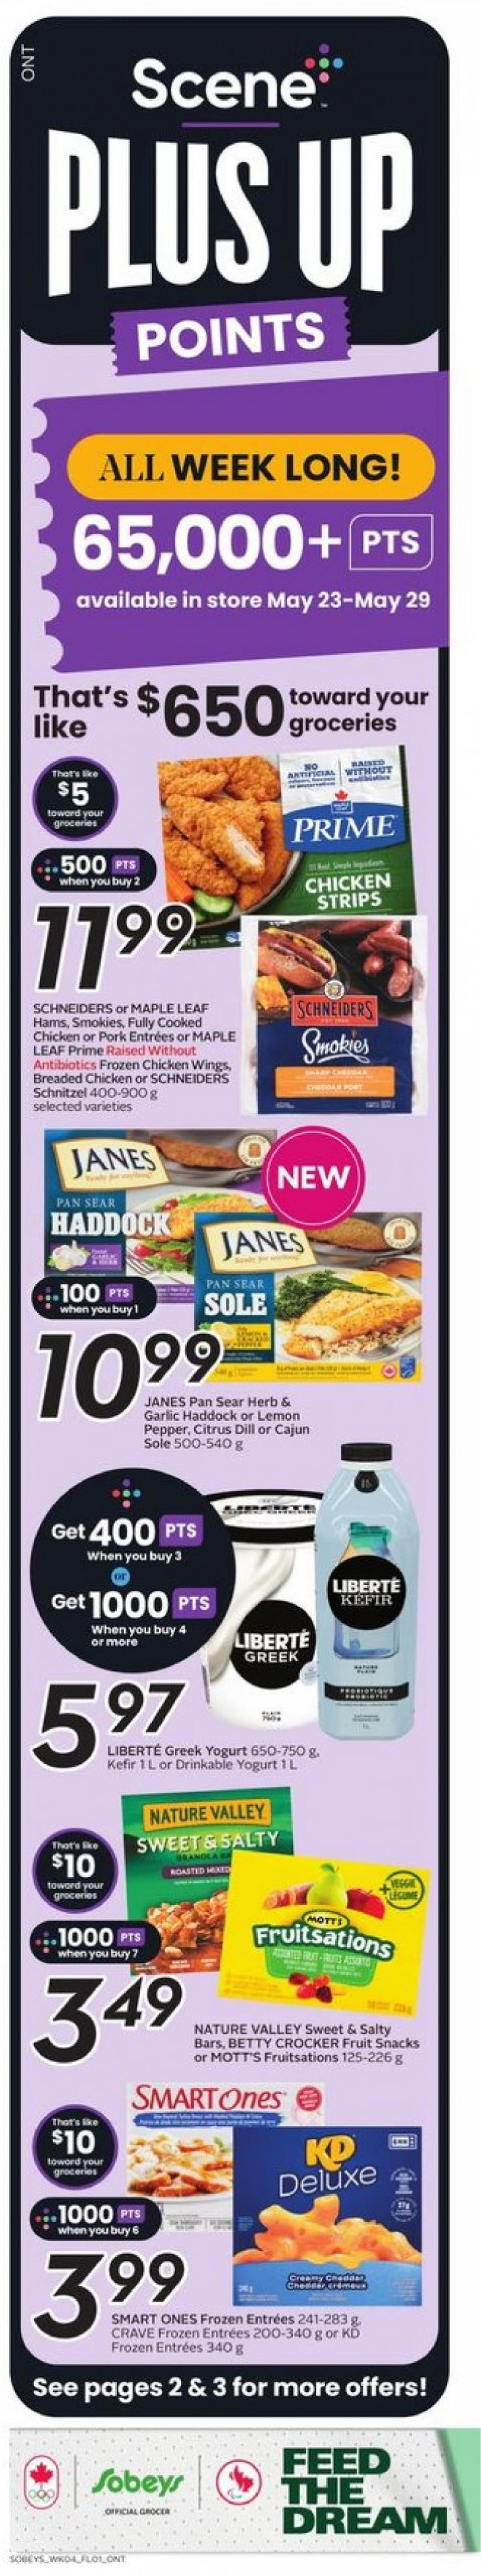 sobeys - Sobeys - Weekly Flyer - Ontario flyer current 23.05. - 29.05. - page: 2